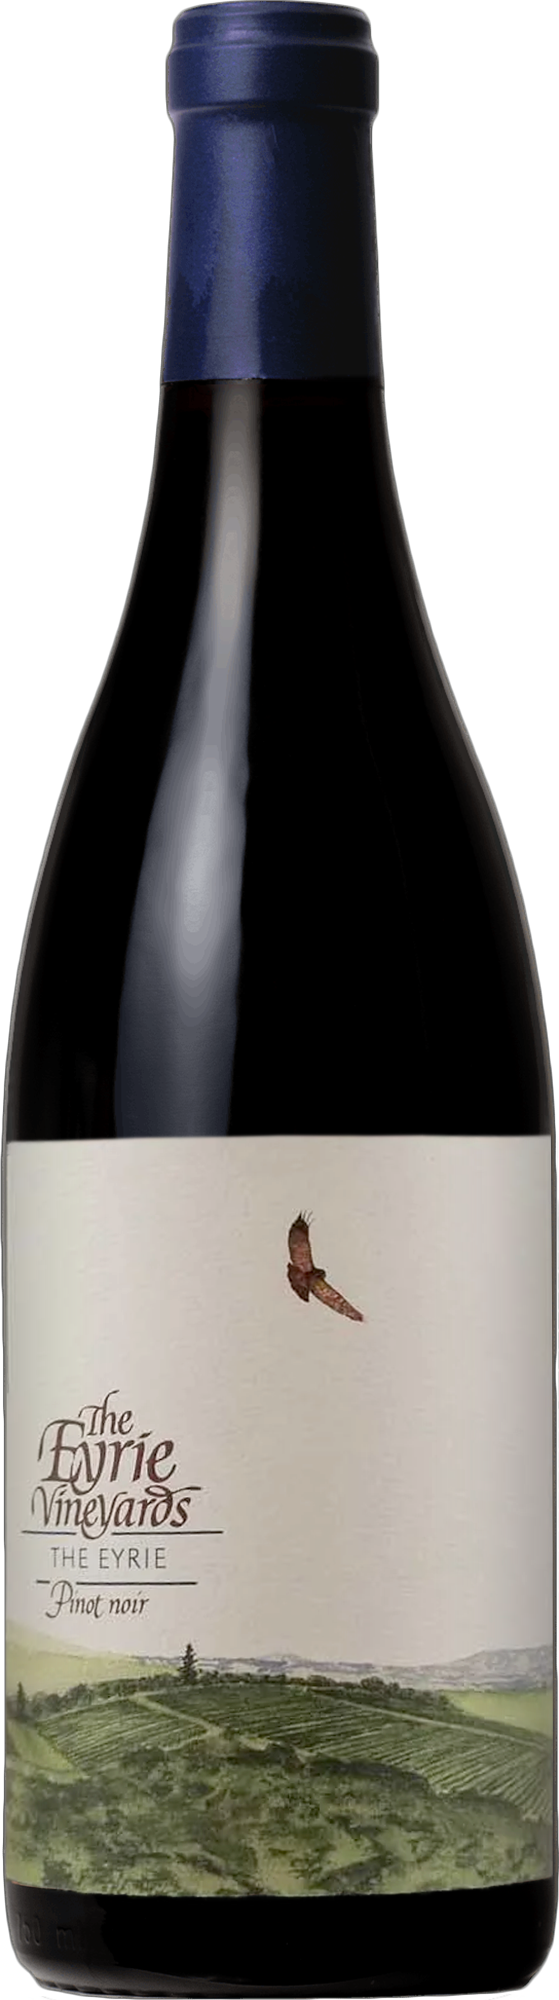 The Eyrie Vineyards The Eyrie Pinot Noir 2019